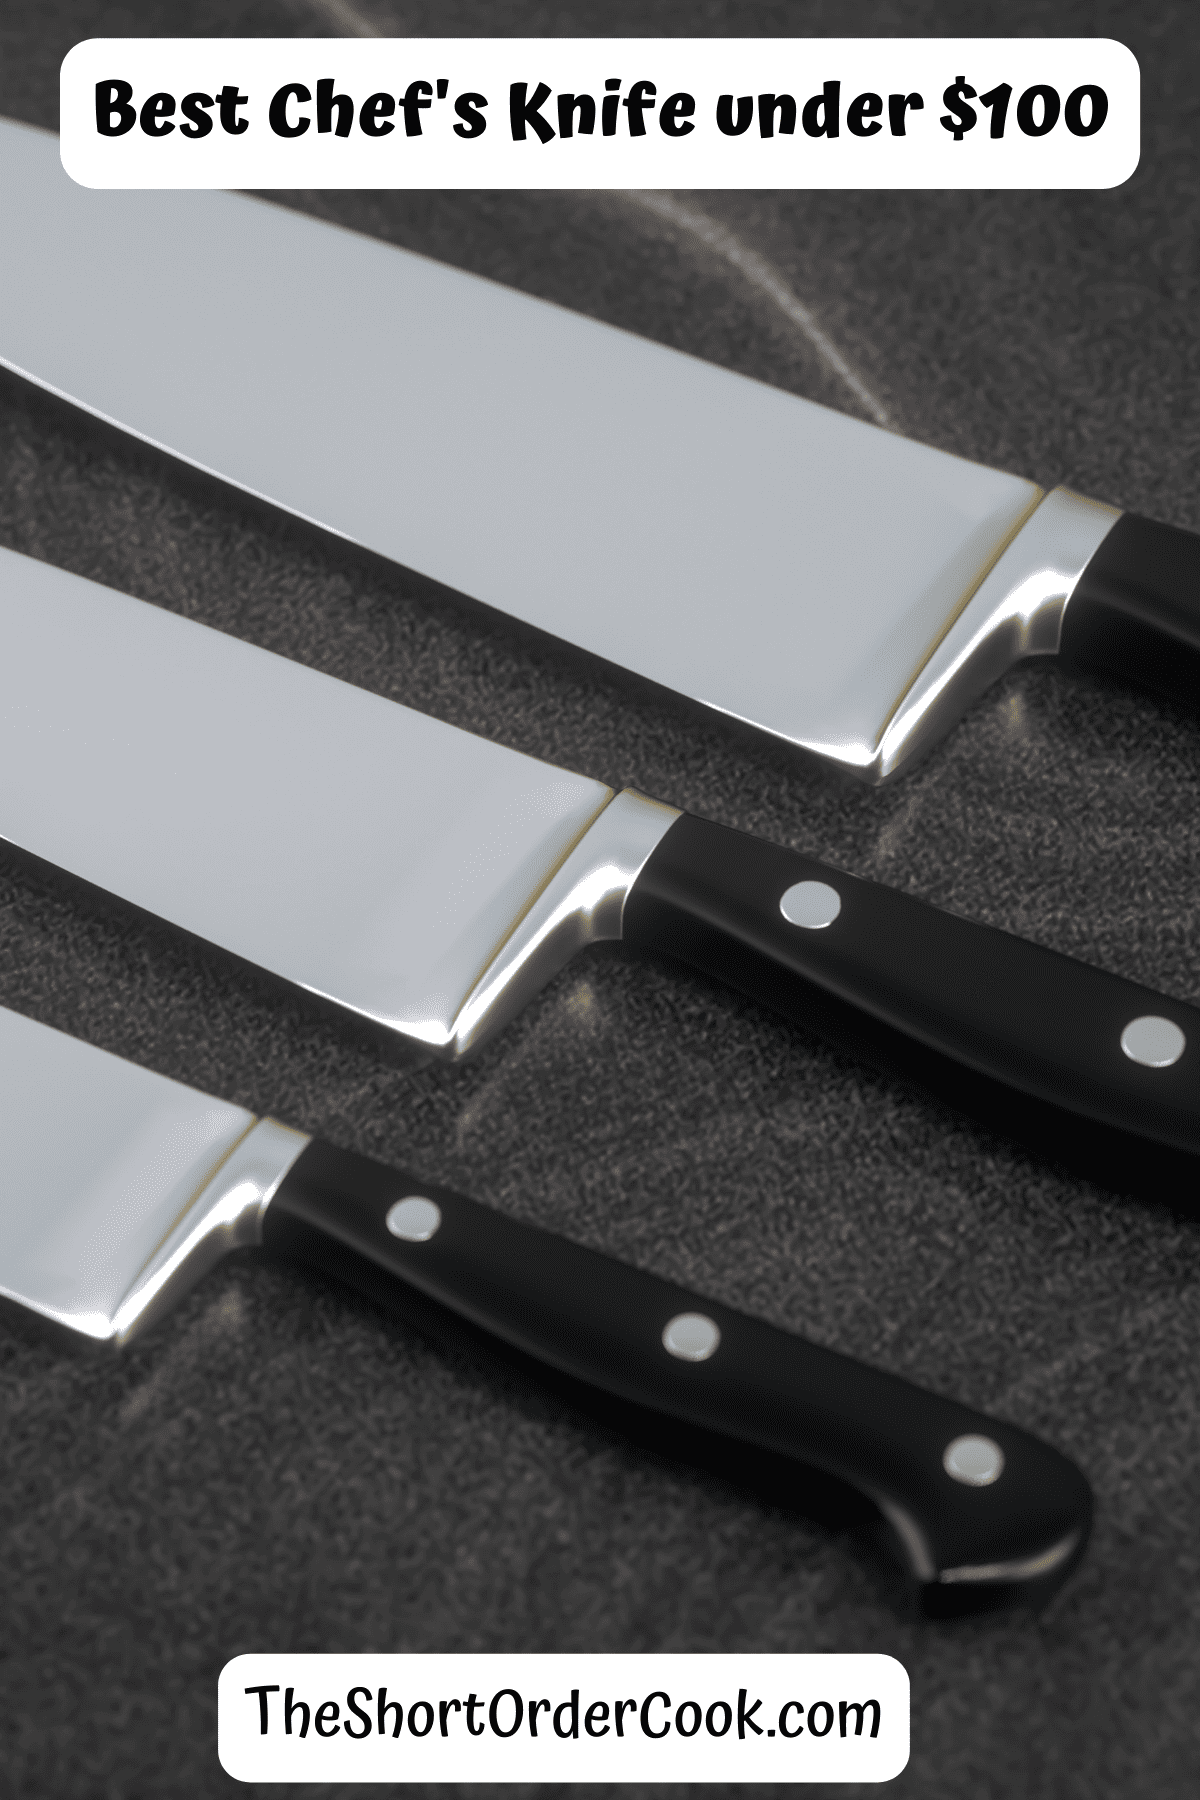 Best chef knives to buy on amazon for under $100 laying on a table. 